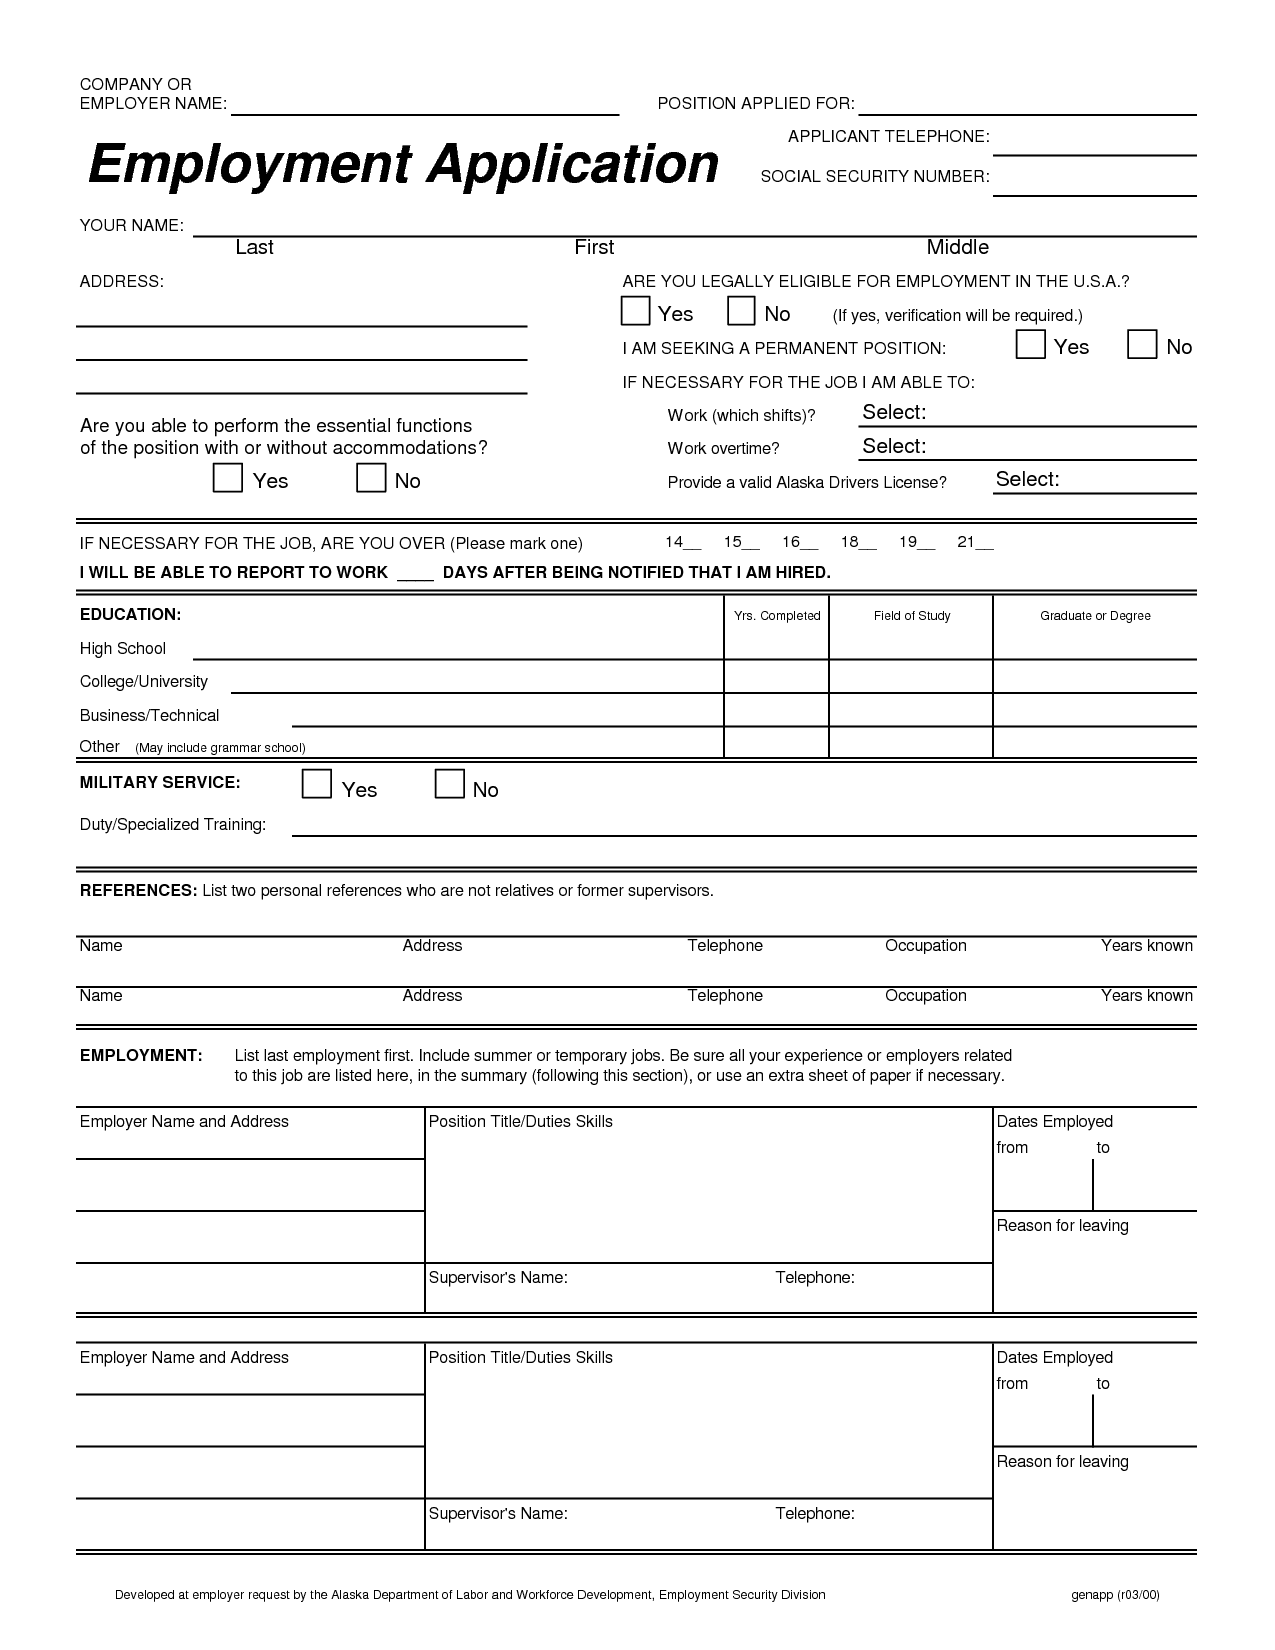 Job Application Form   PDF Download for Employers